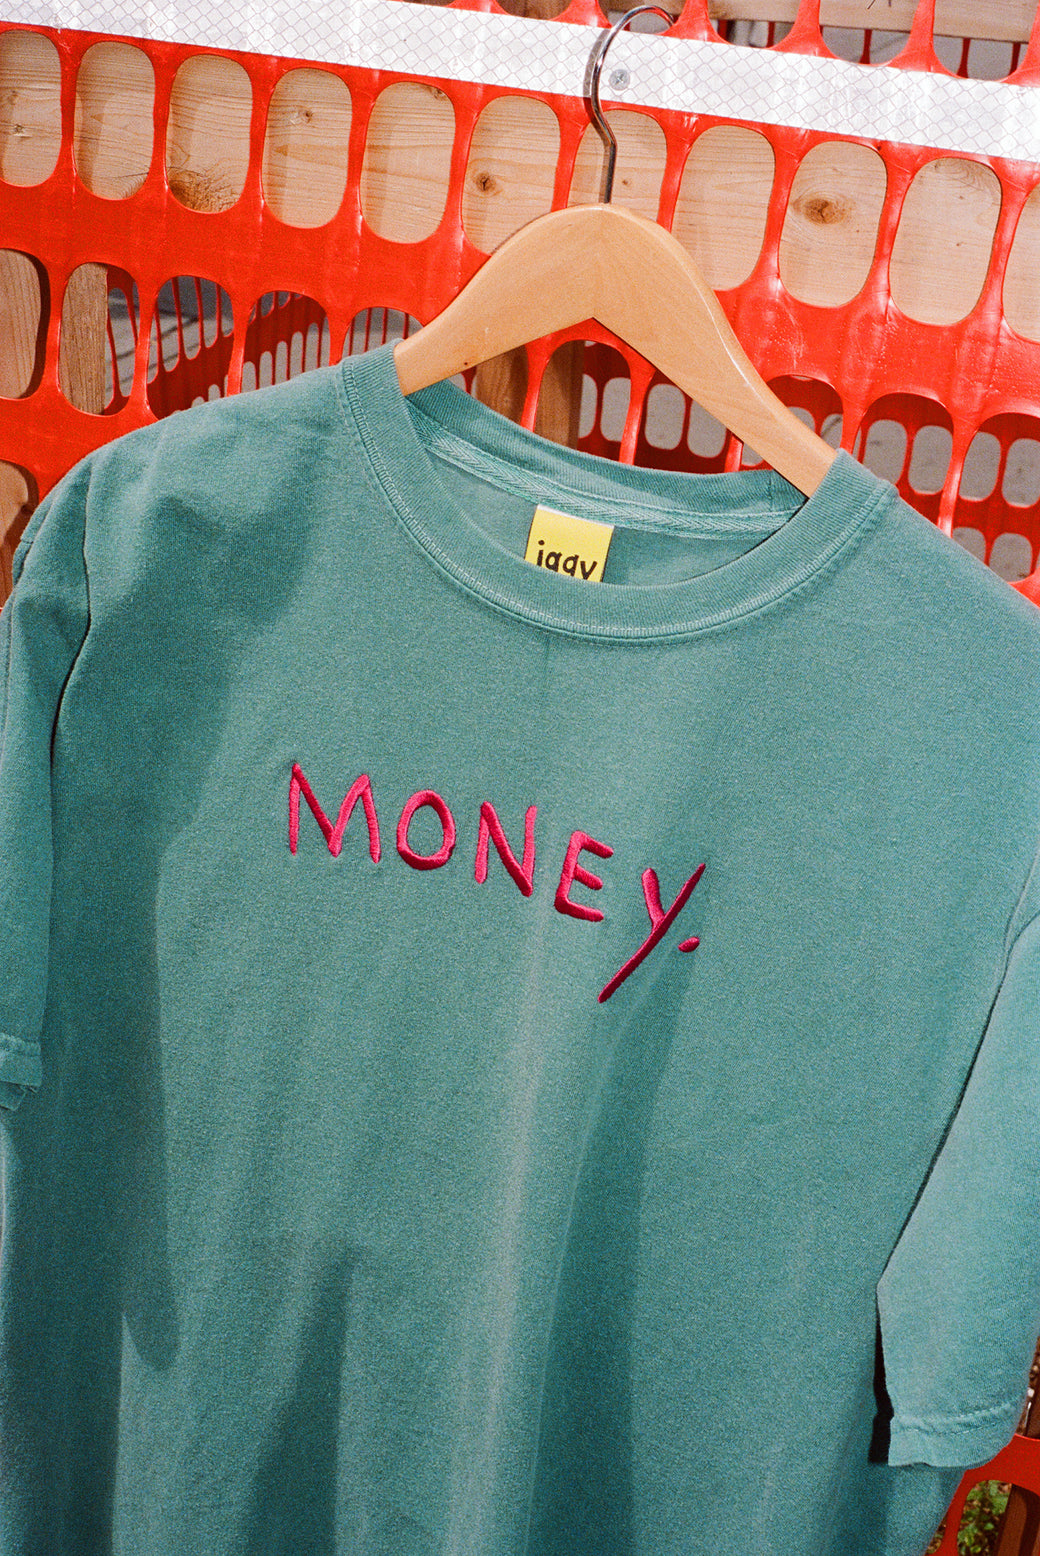 MONEY EMBROIDERED T SHIRT